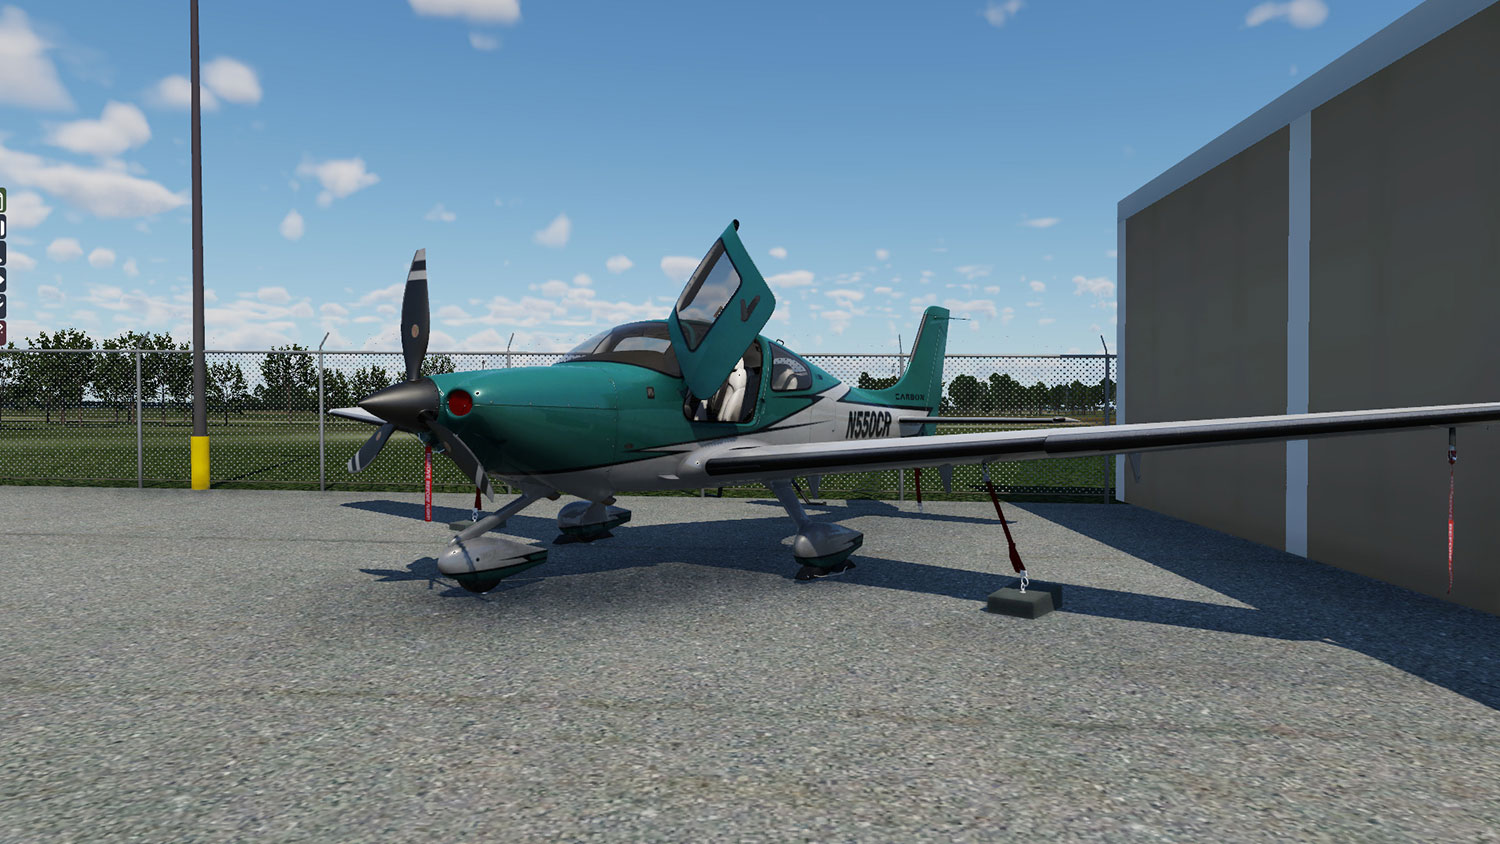 X-Plane.org - Reality Expansion Pack for Cirrus SR22 XP12